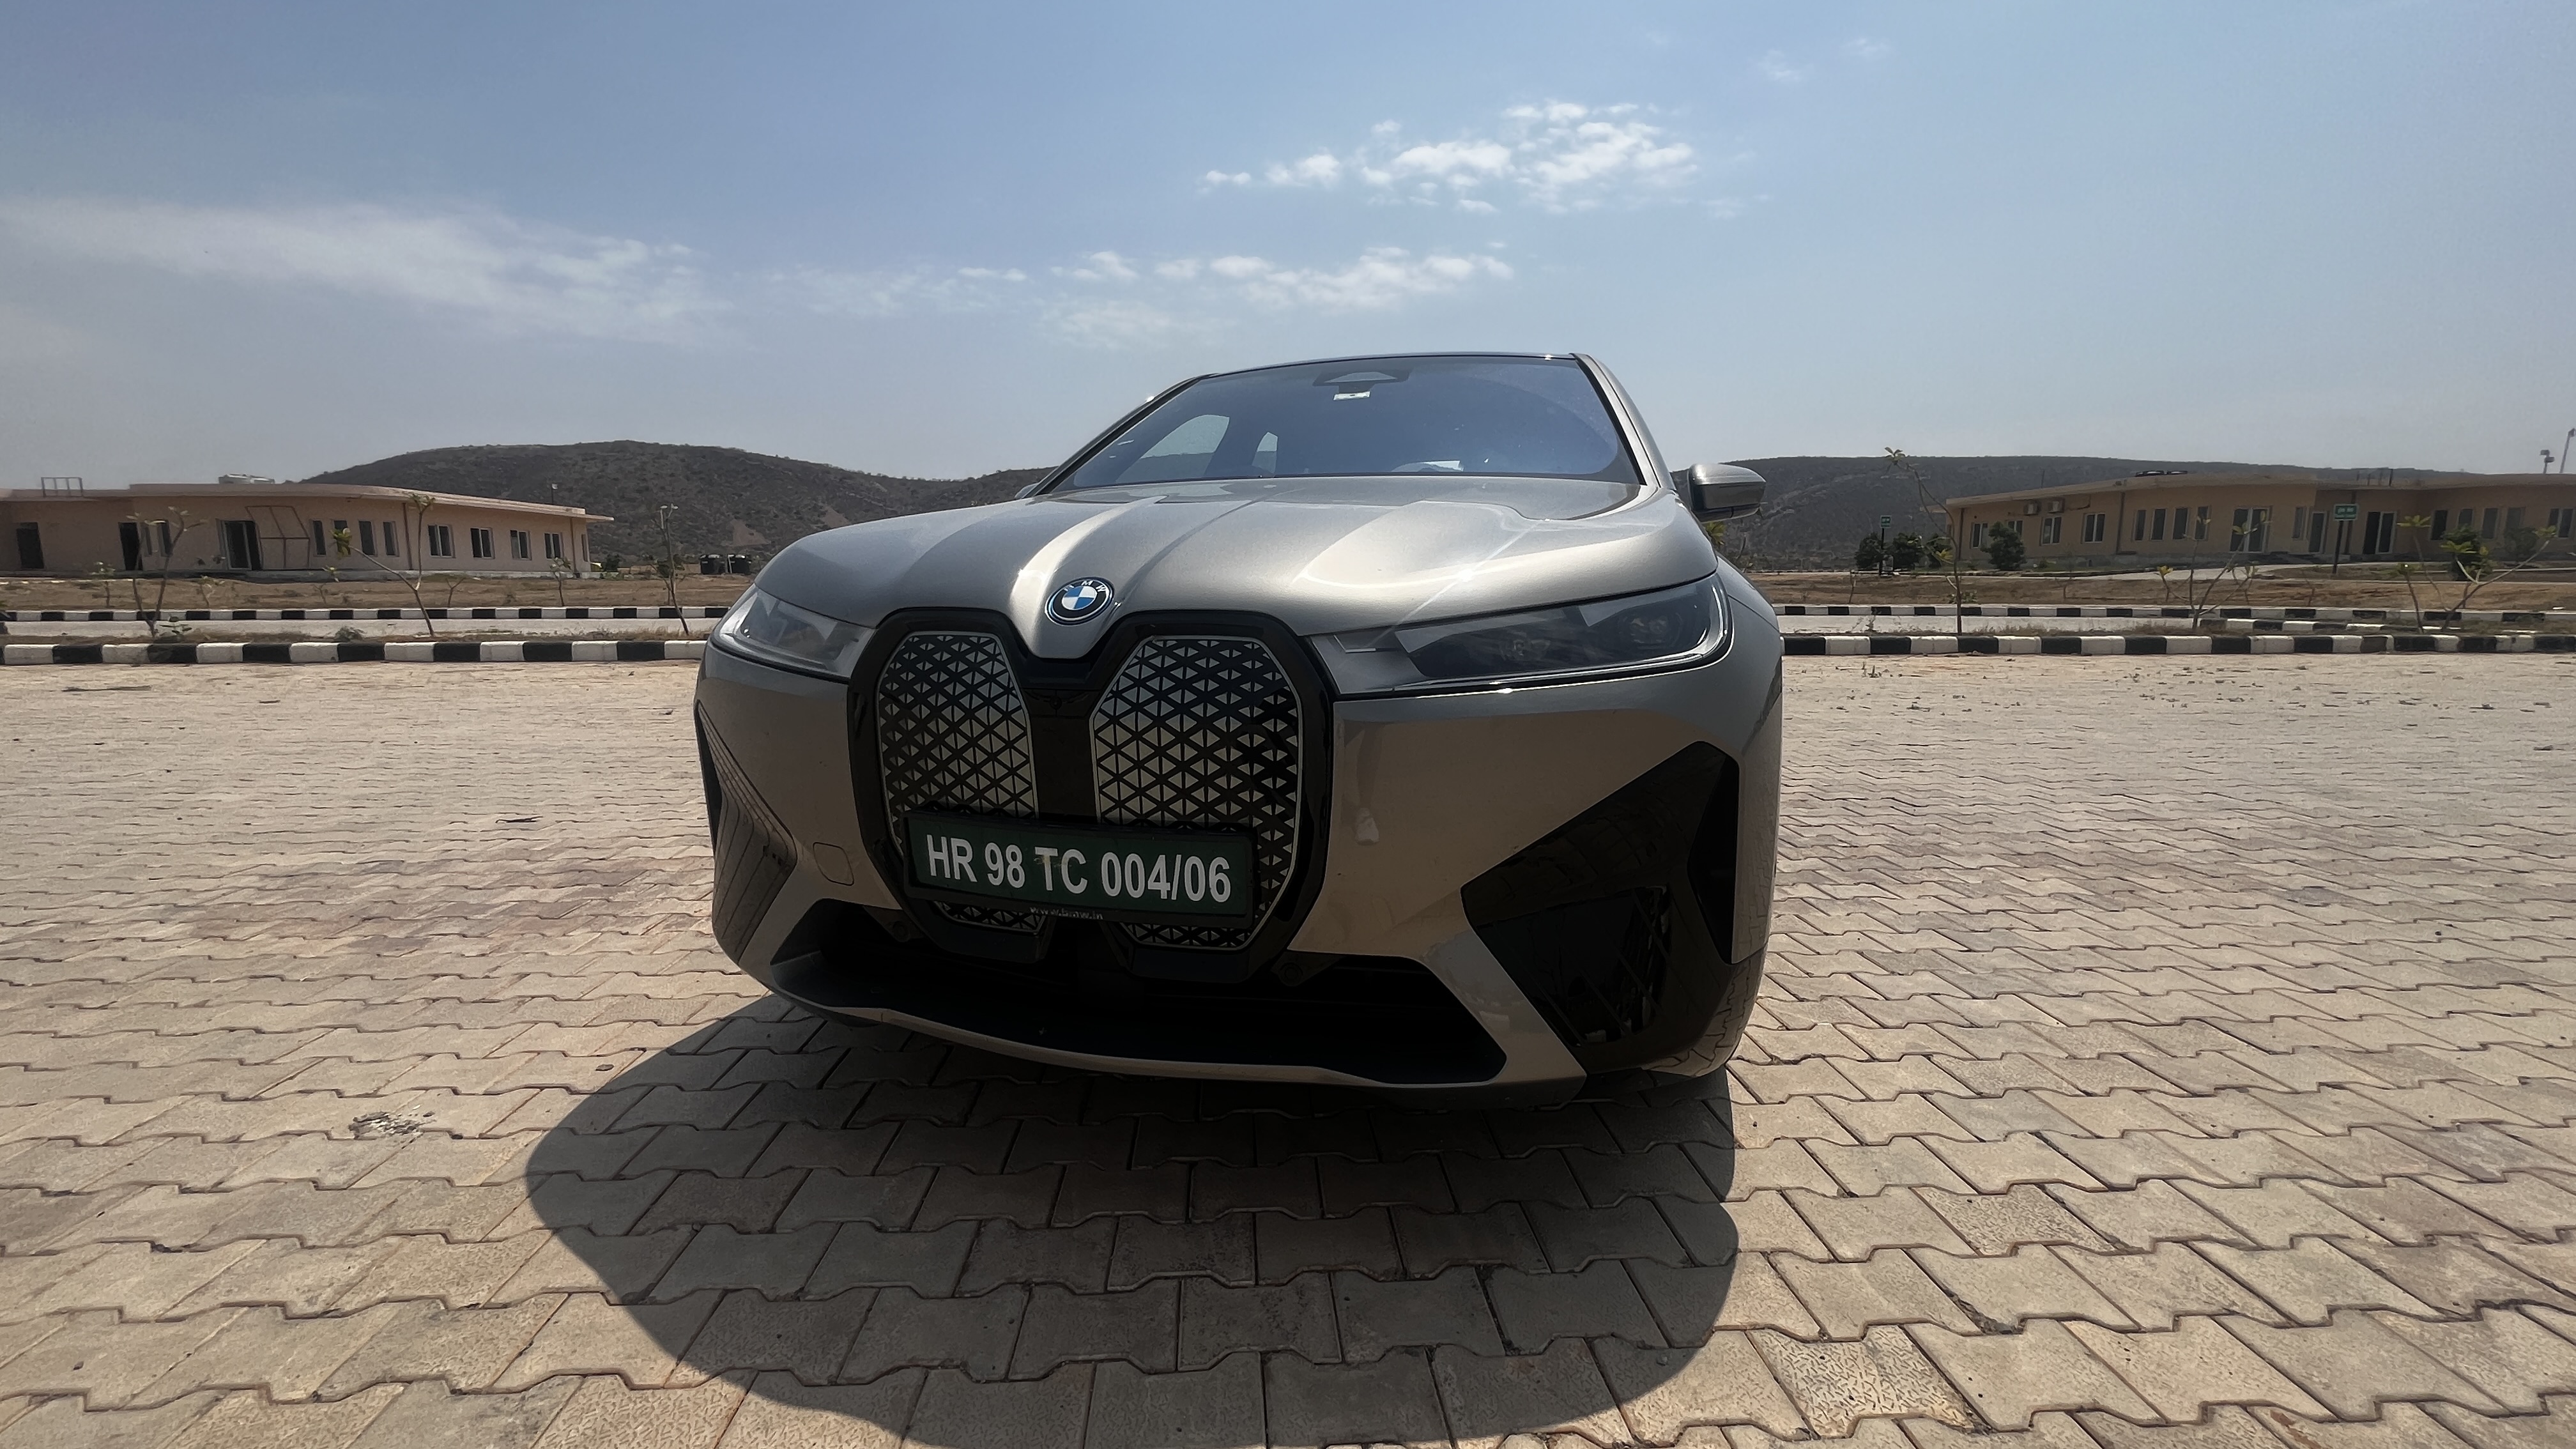 During the course of this drive review, the BMW iX50 was driven from Delhi to Jaipur and back on the new highway between the two cities. The one-way distance of 290 kms was covered mostly at the top-permissible speed of 120 kmph, with AC at moderate and with four adult passengers. Taking into account these factors, the BMW iX50 offered a range of around 400 kms before coming down to 10 per cent battery.